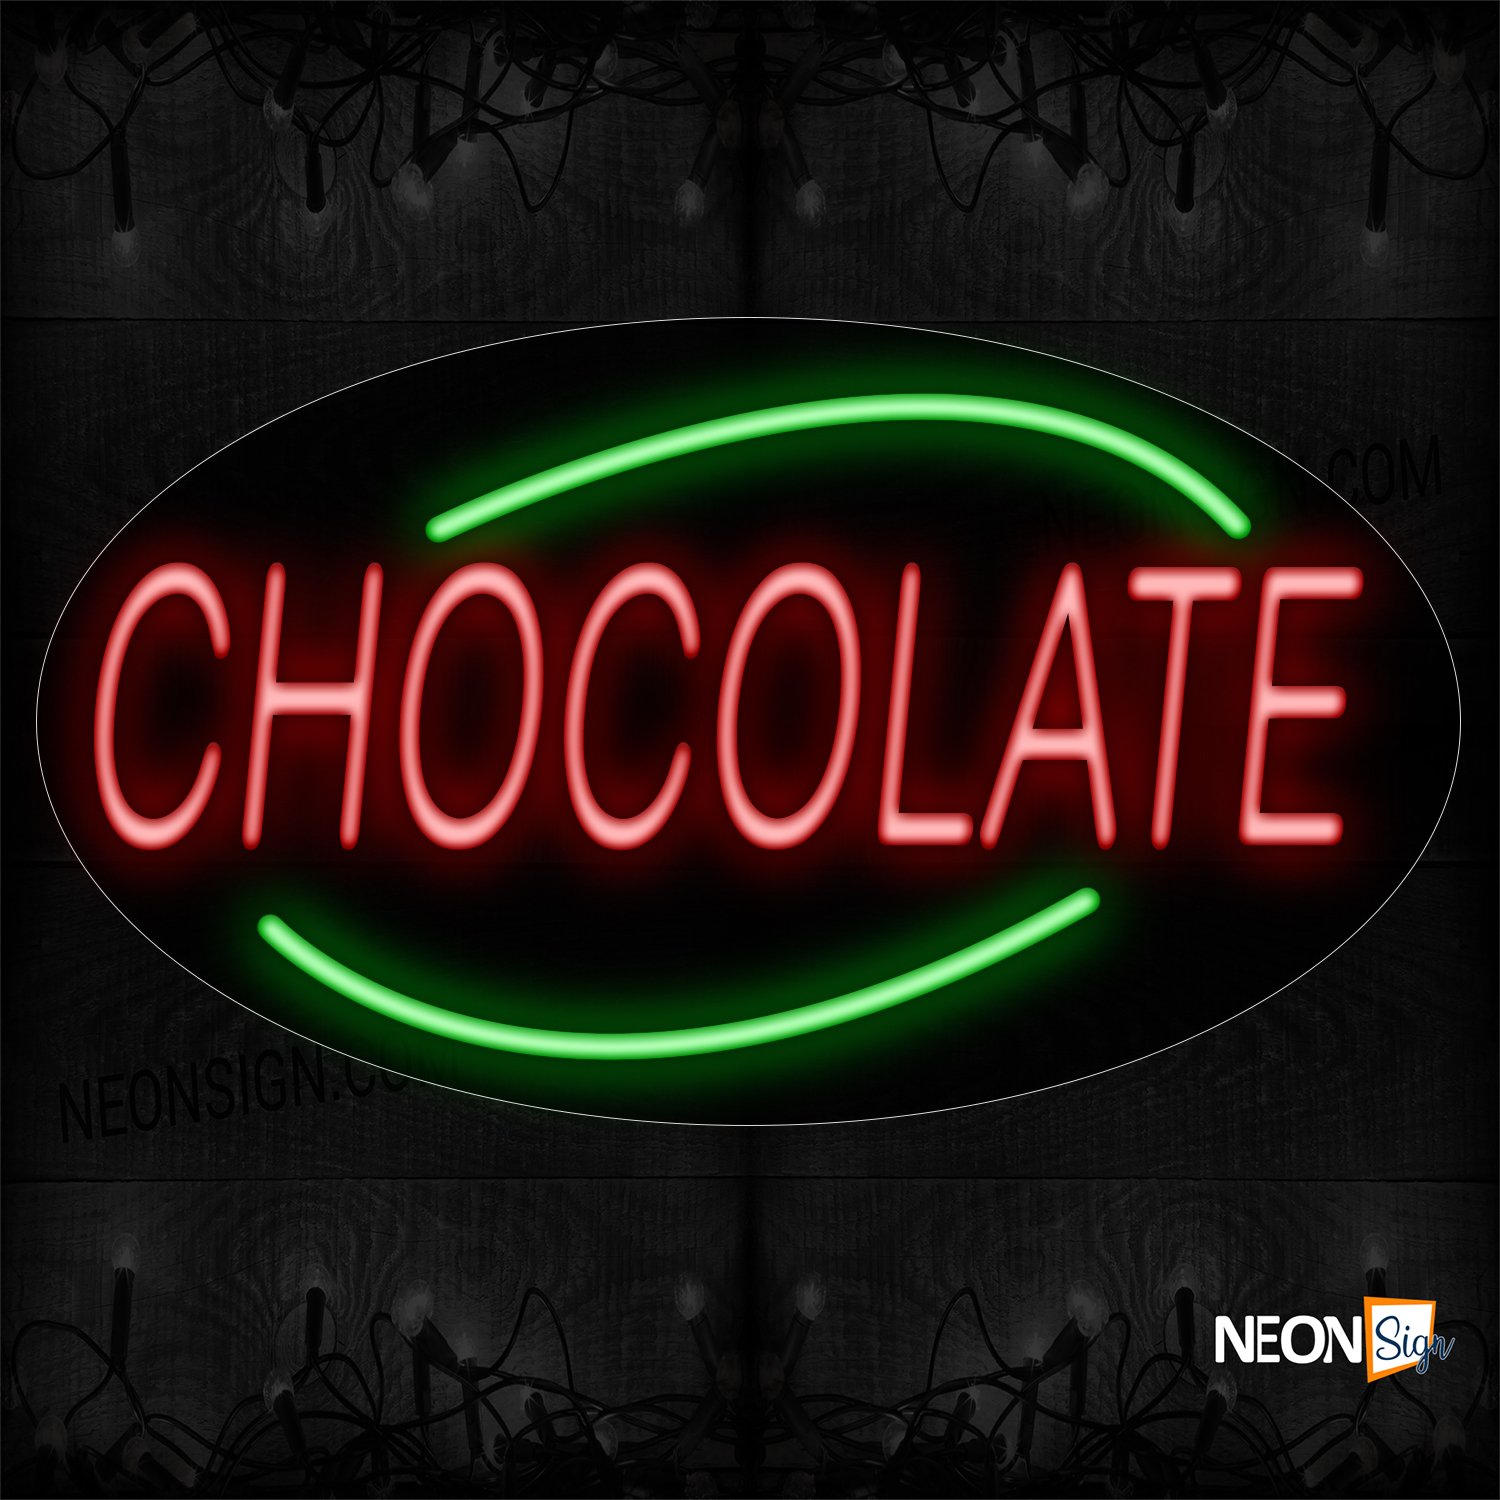 Image of 14332 Chocolate With Arc Border Neon Sign_17x30 Contoured Black Backing